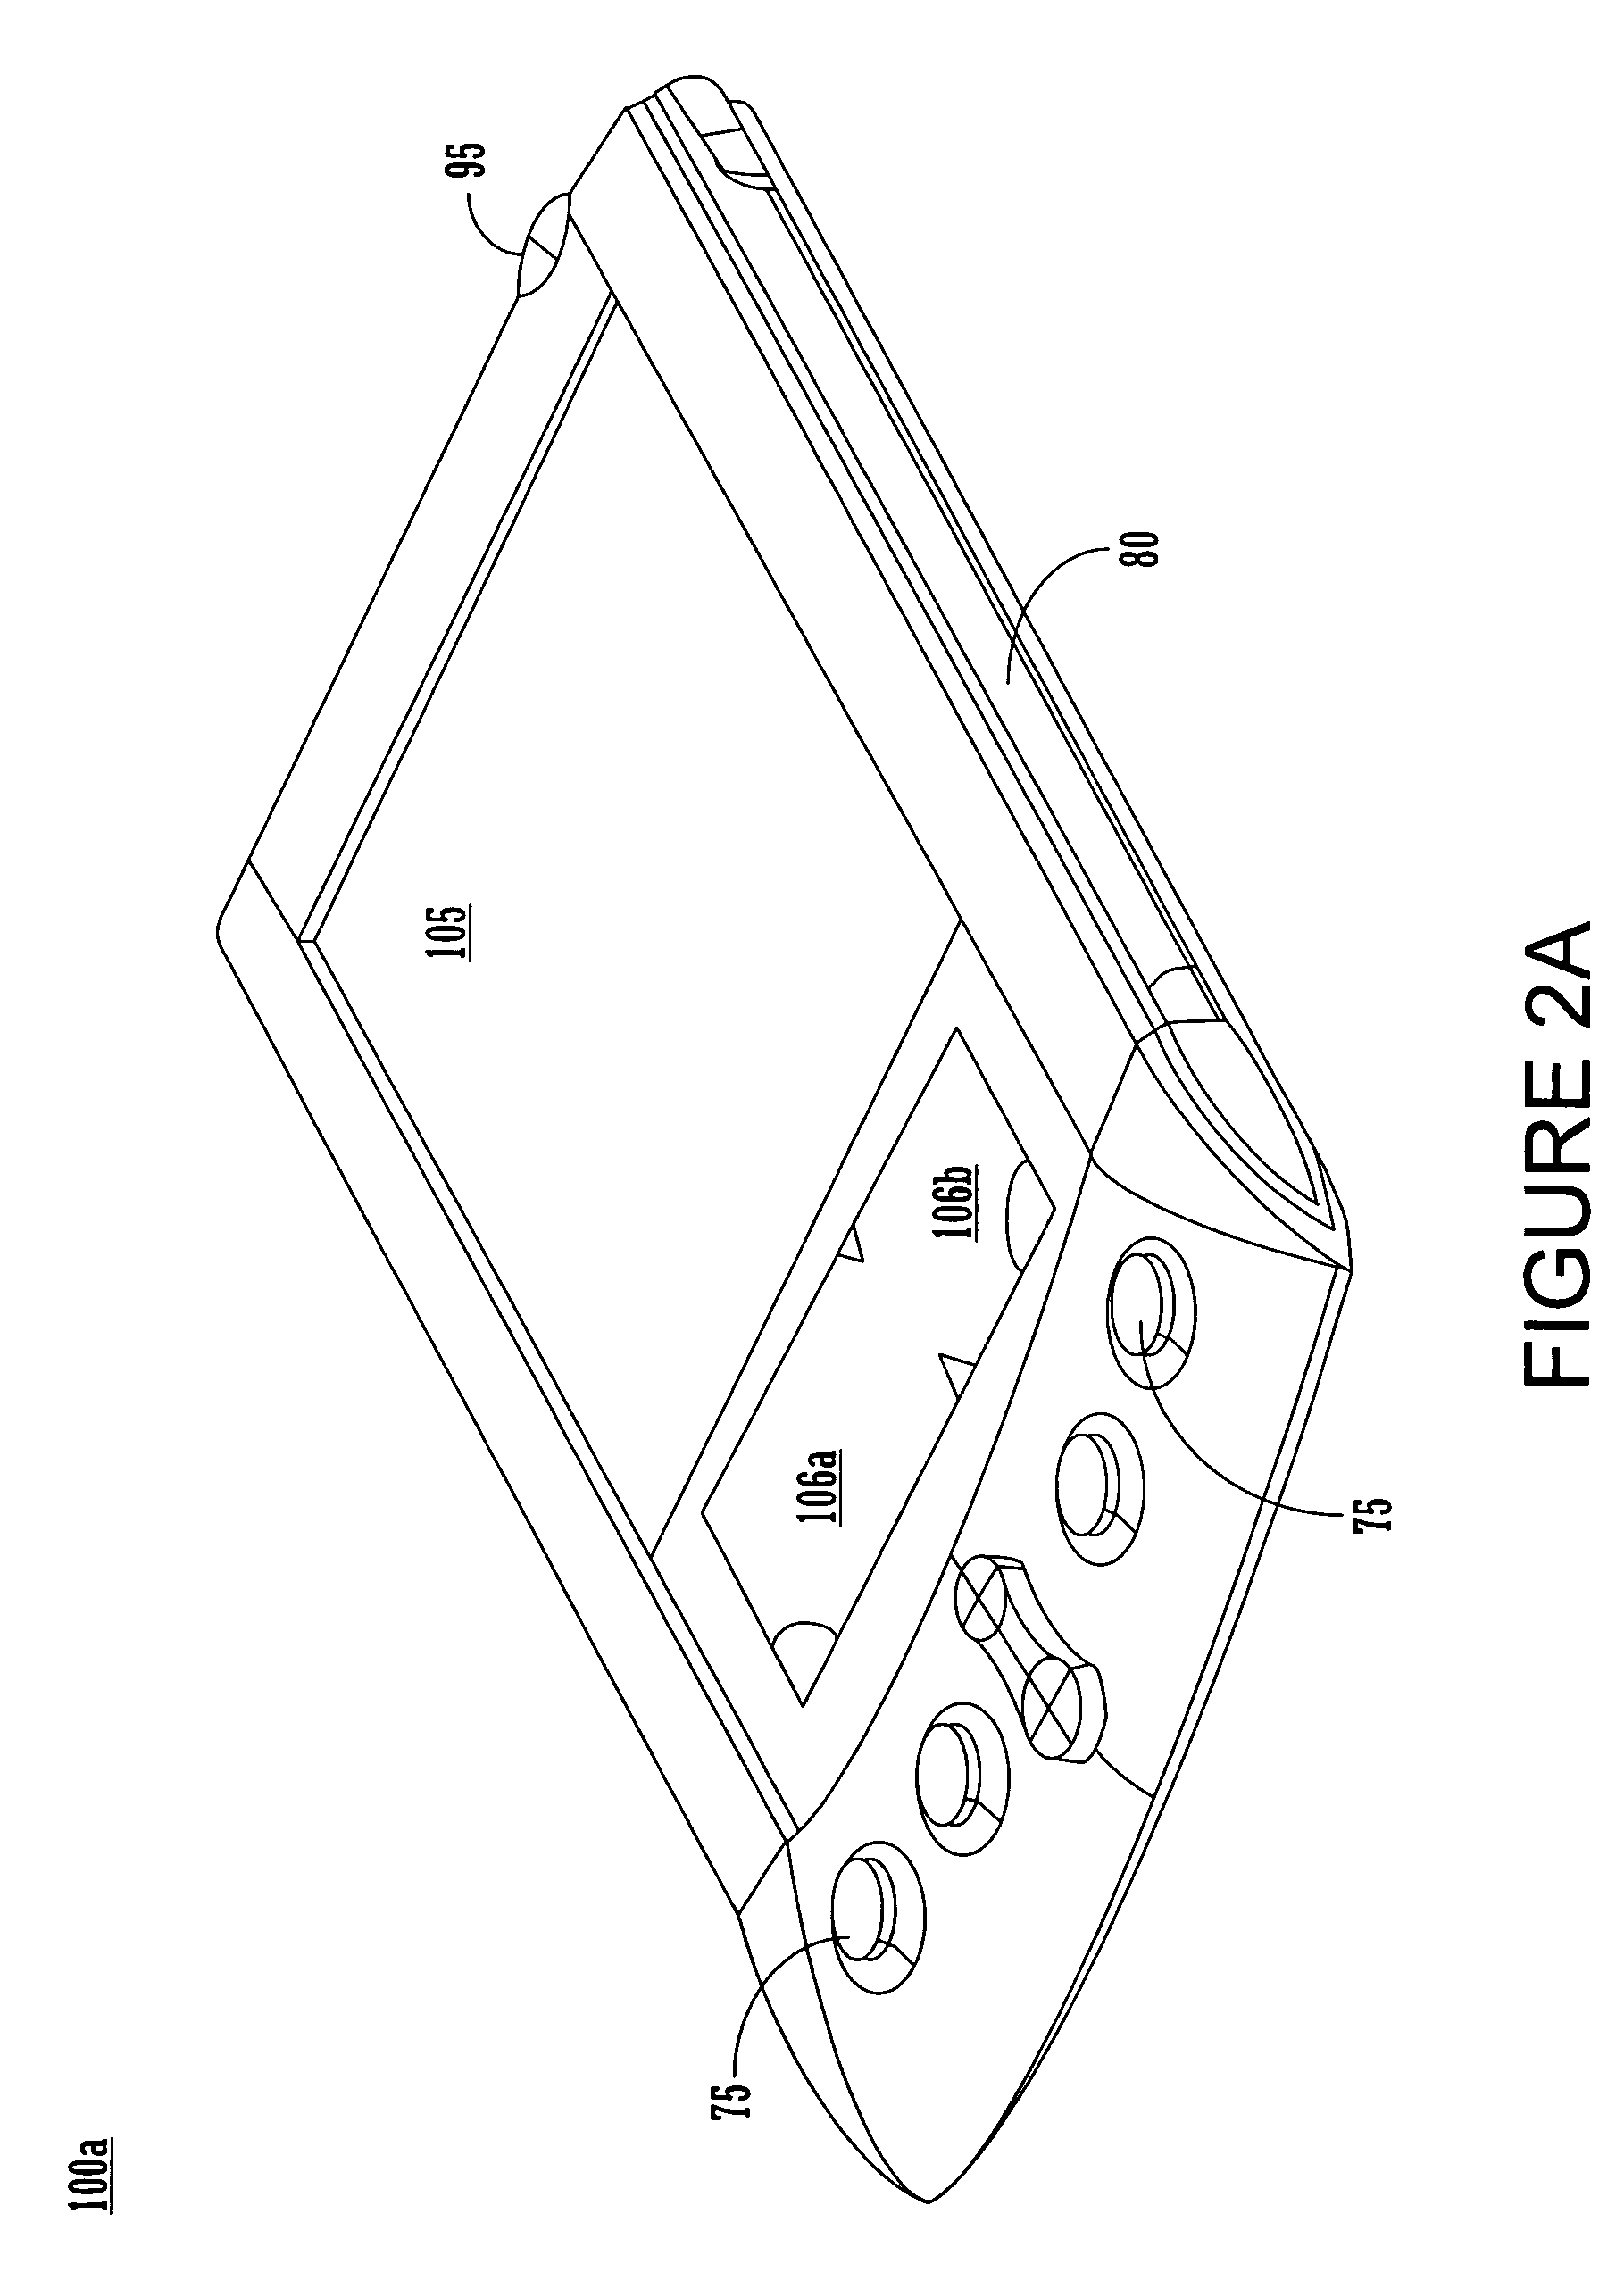 Method and system for providing information for identifying callers based on a partial number